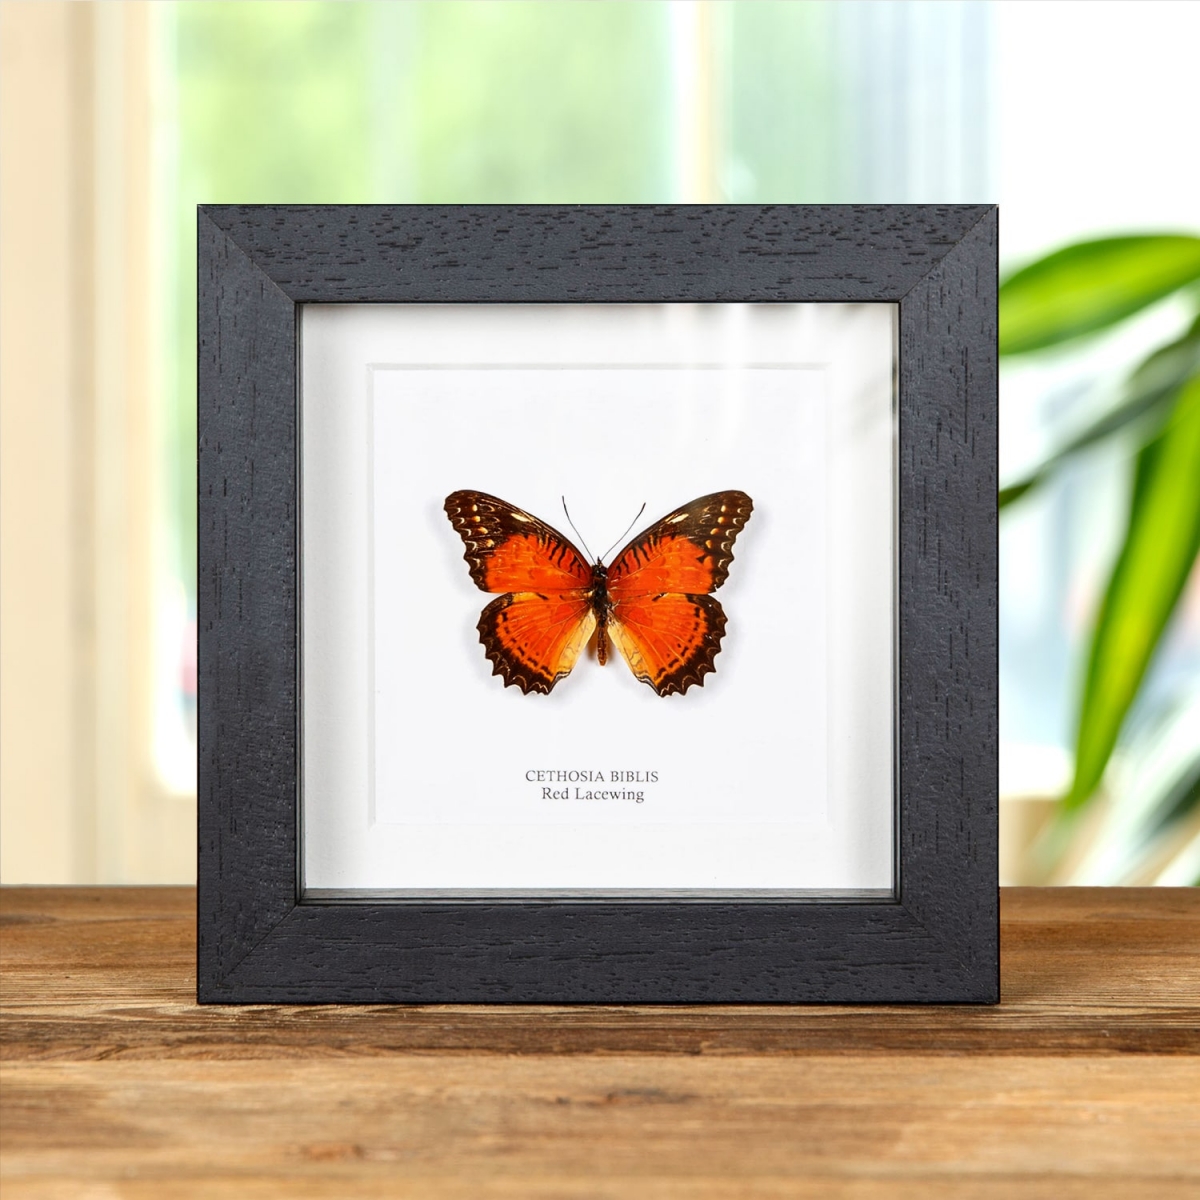 Minibeast Red Lacewing in Box Frame (Cethosia biblis)